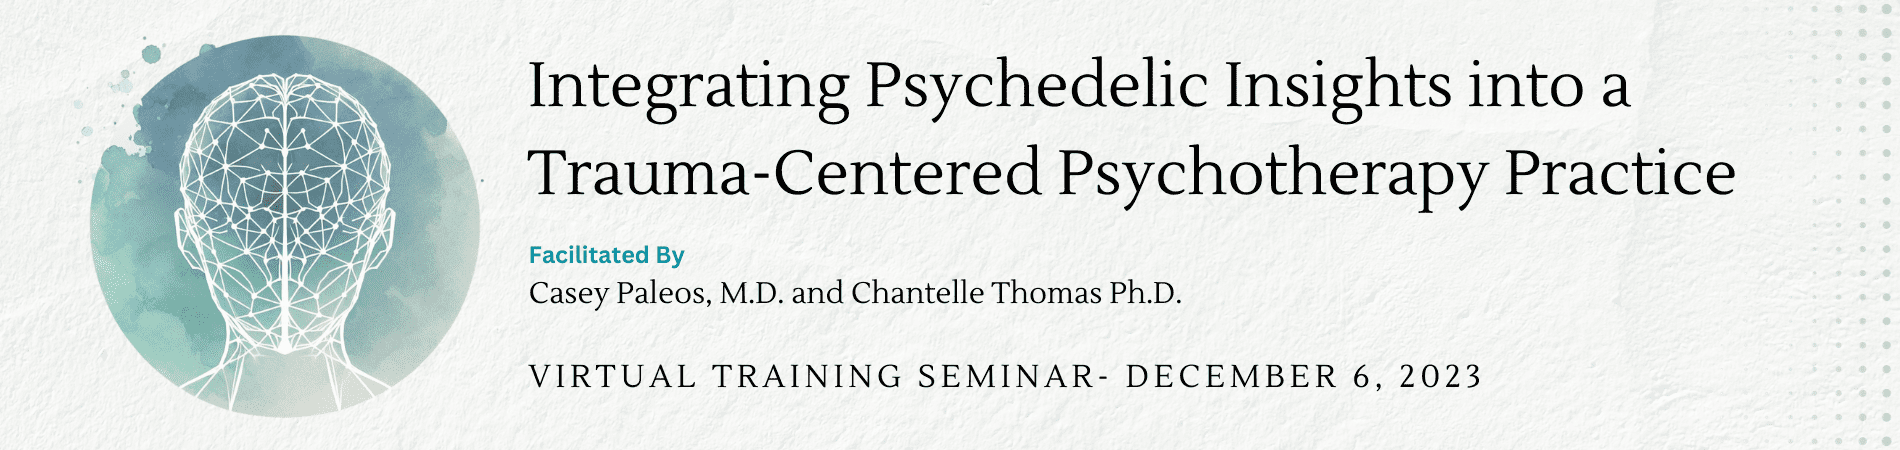 Hero banner of Integrating Psychedelic Insights into a Trauma-Centered Psychotherapy Practice